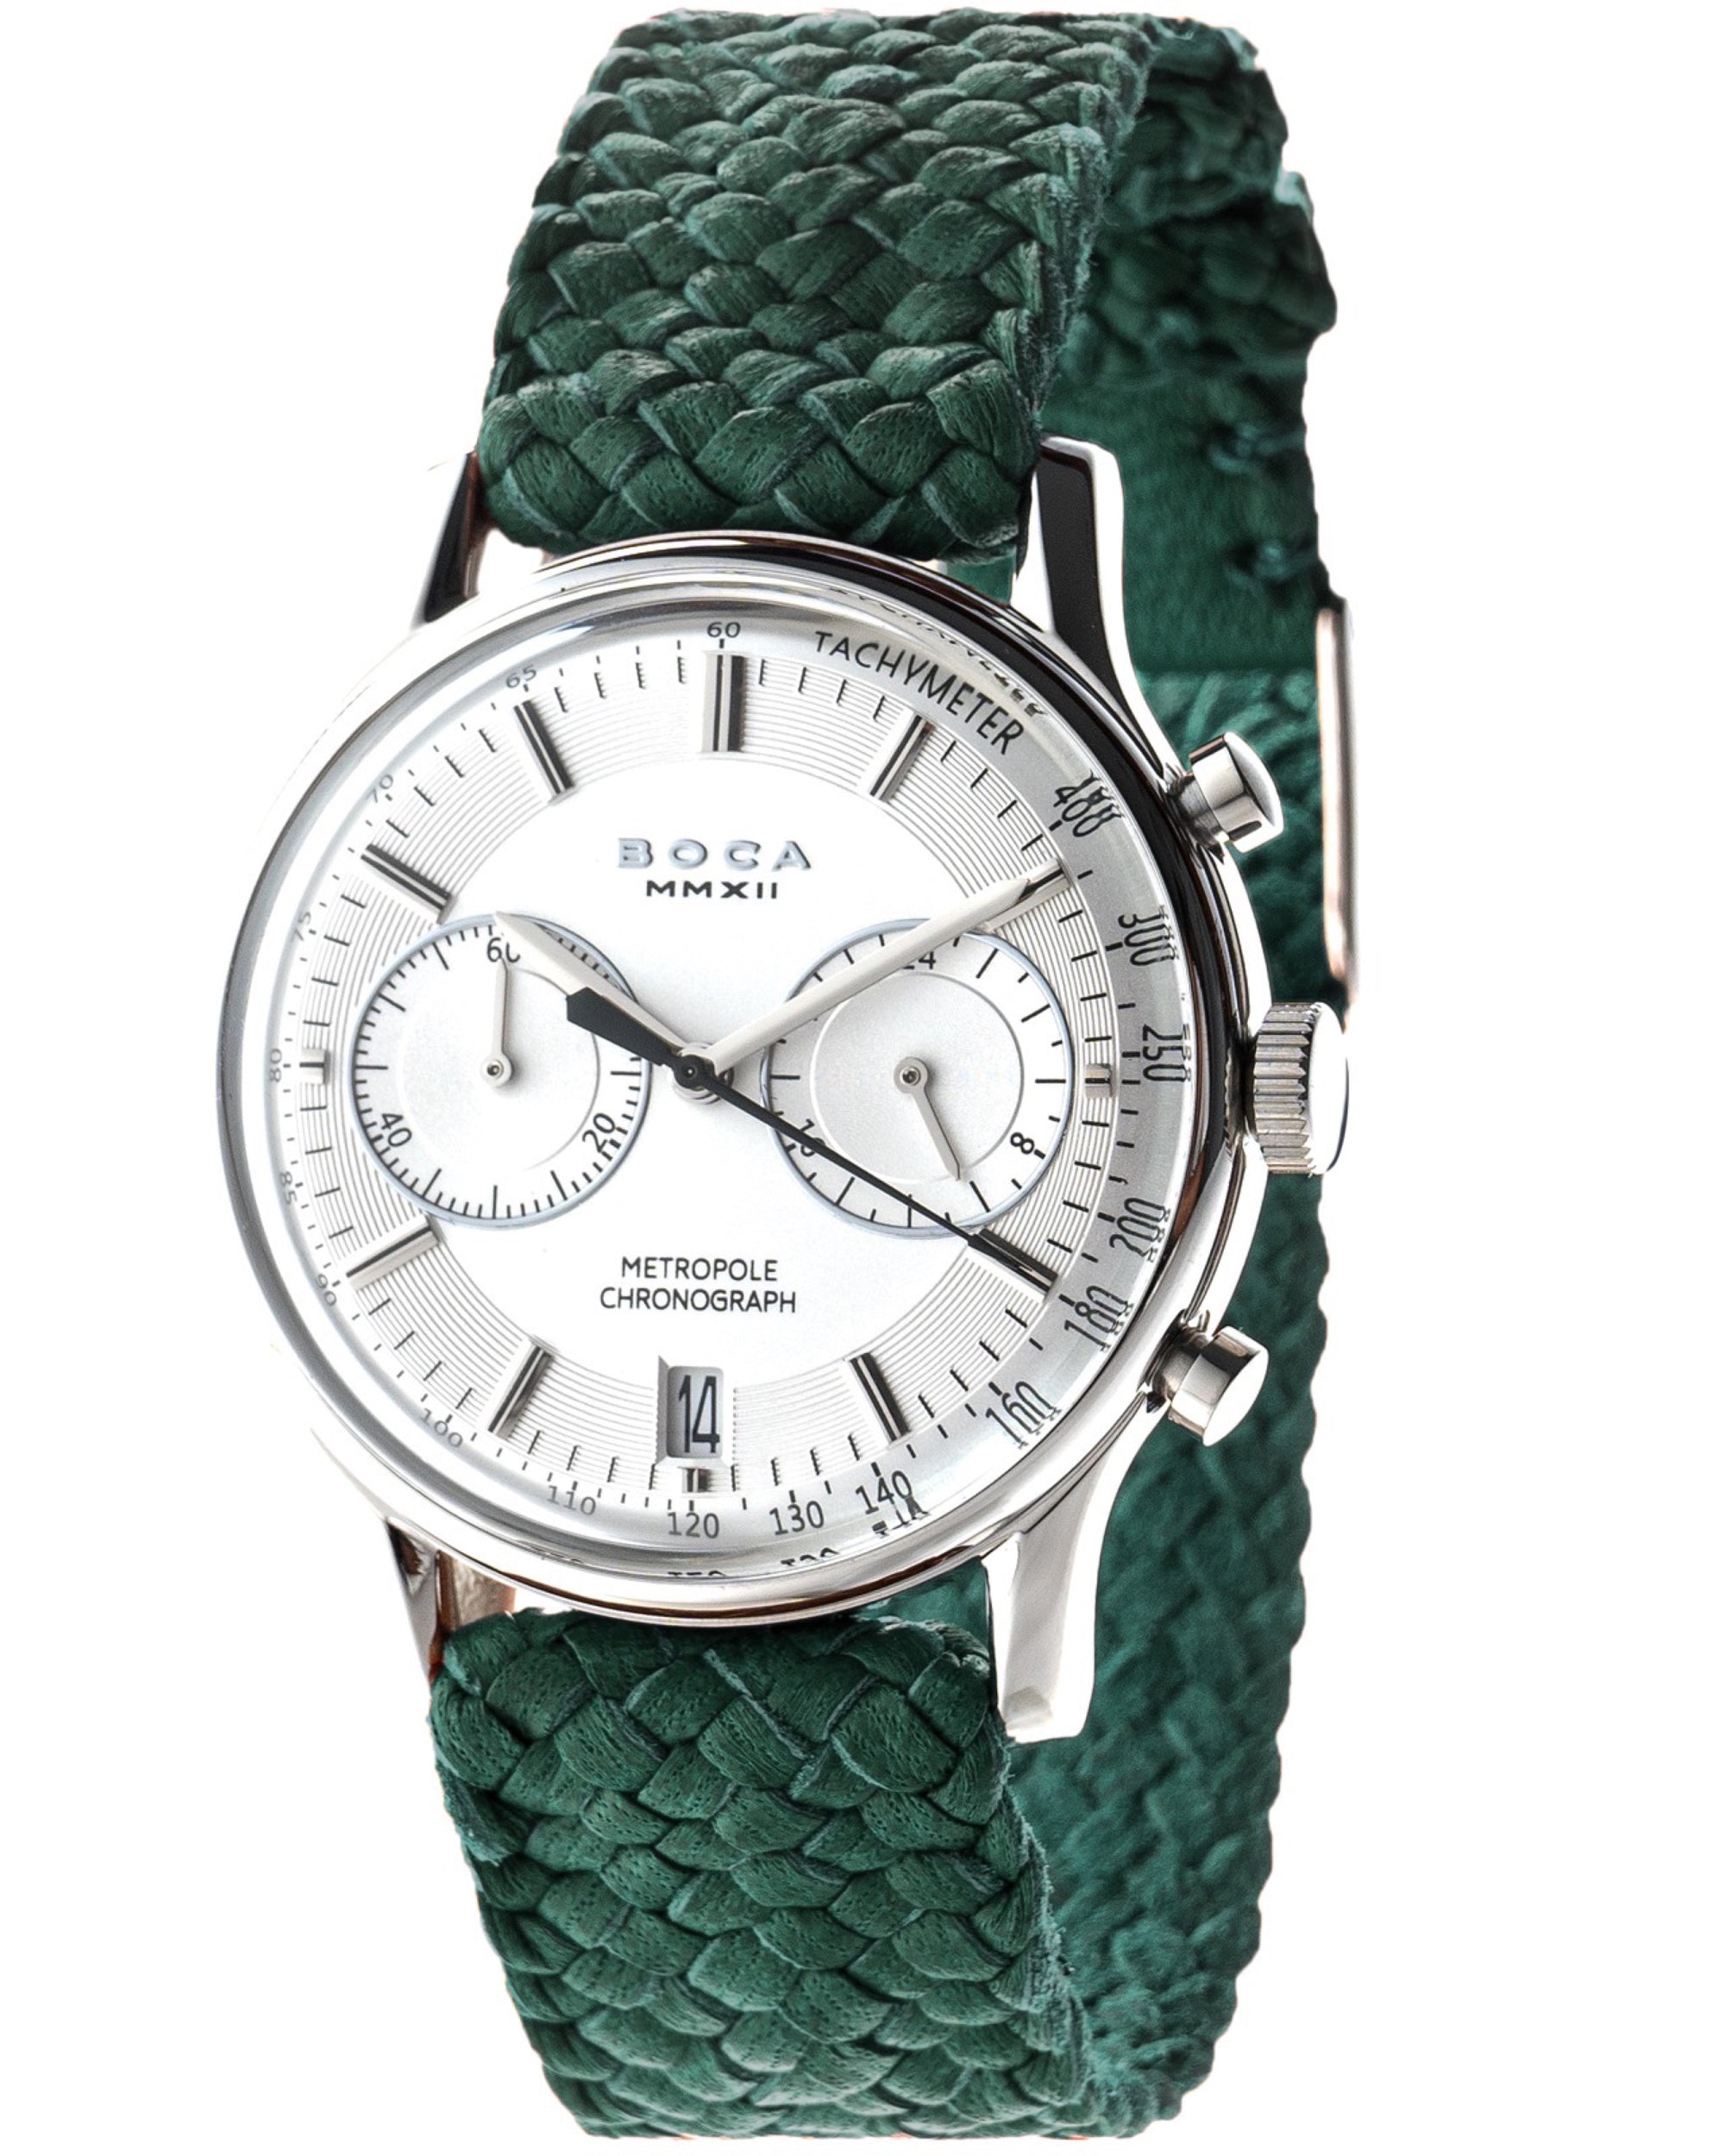 Metropole Chrono Silver with Forest Green Wristband